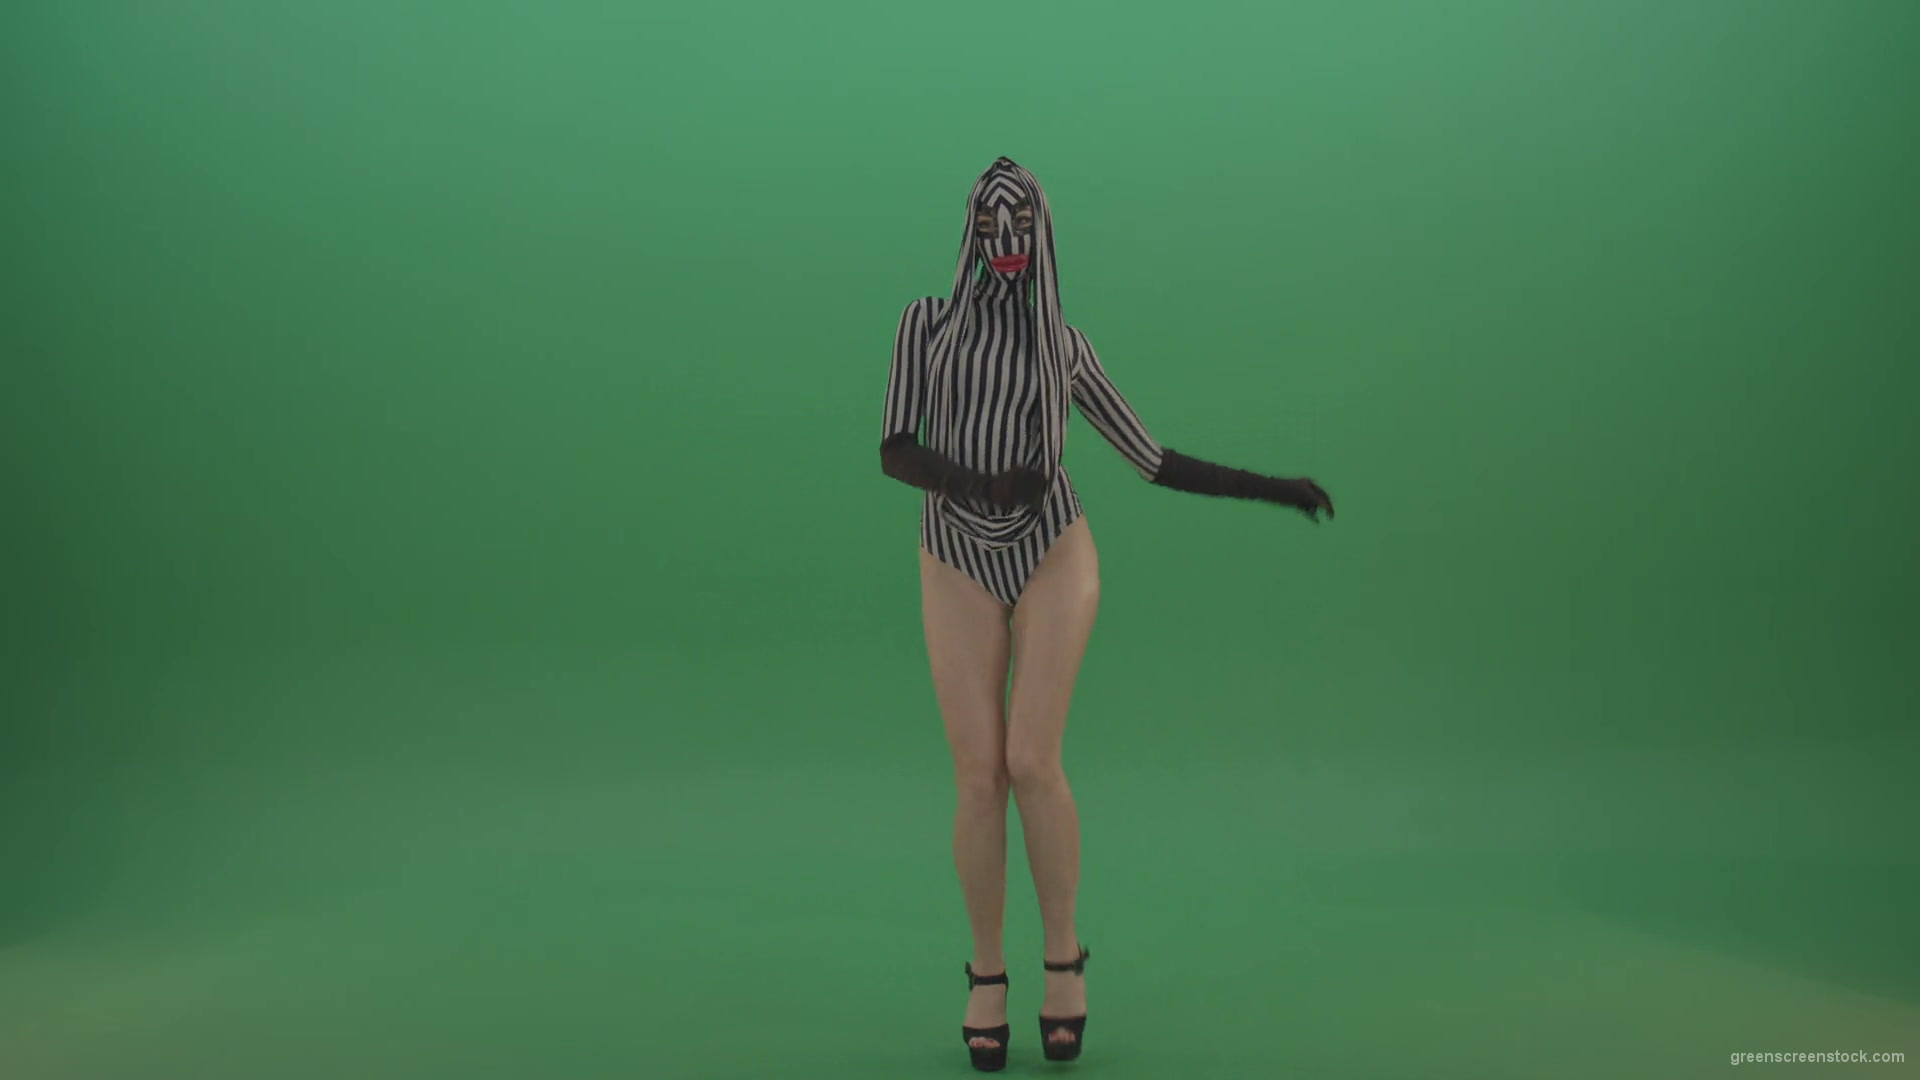 Long-legs-girl-march-in-white-black-stripe-costume-and-mask-on-green-screen-1920_008 Green Screen Stock